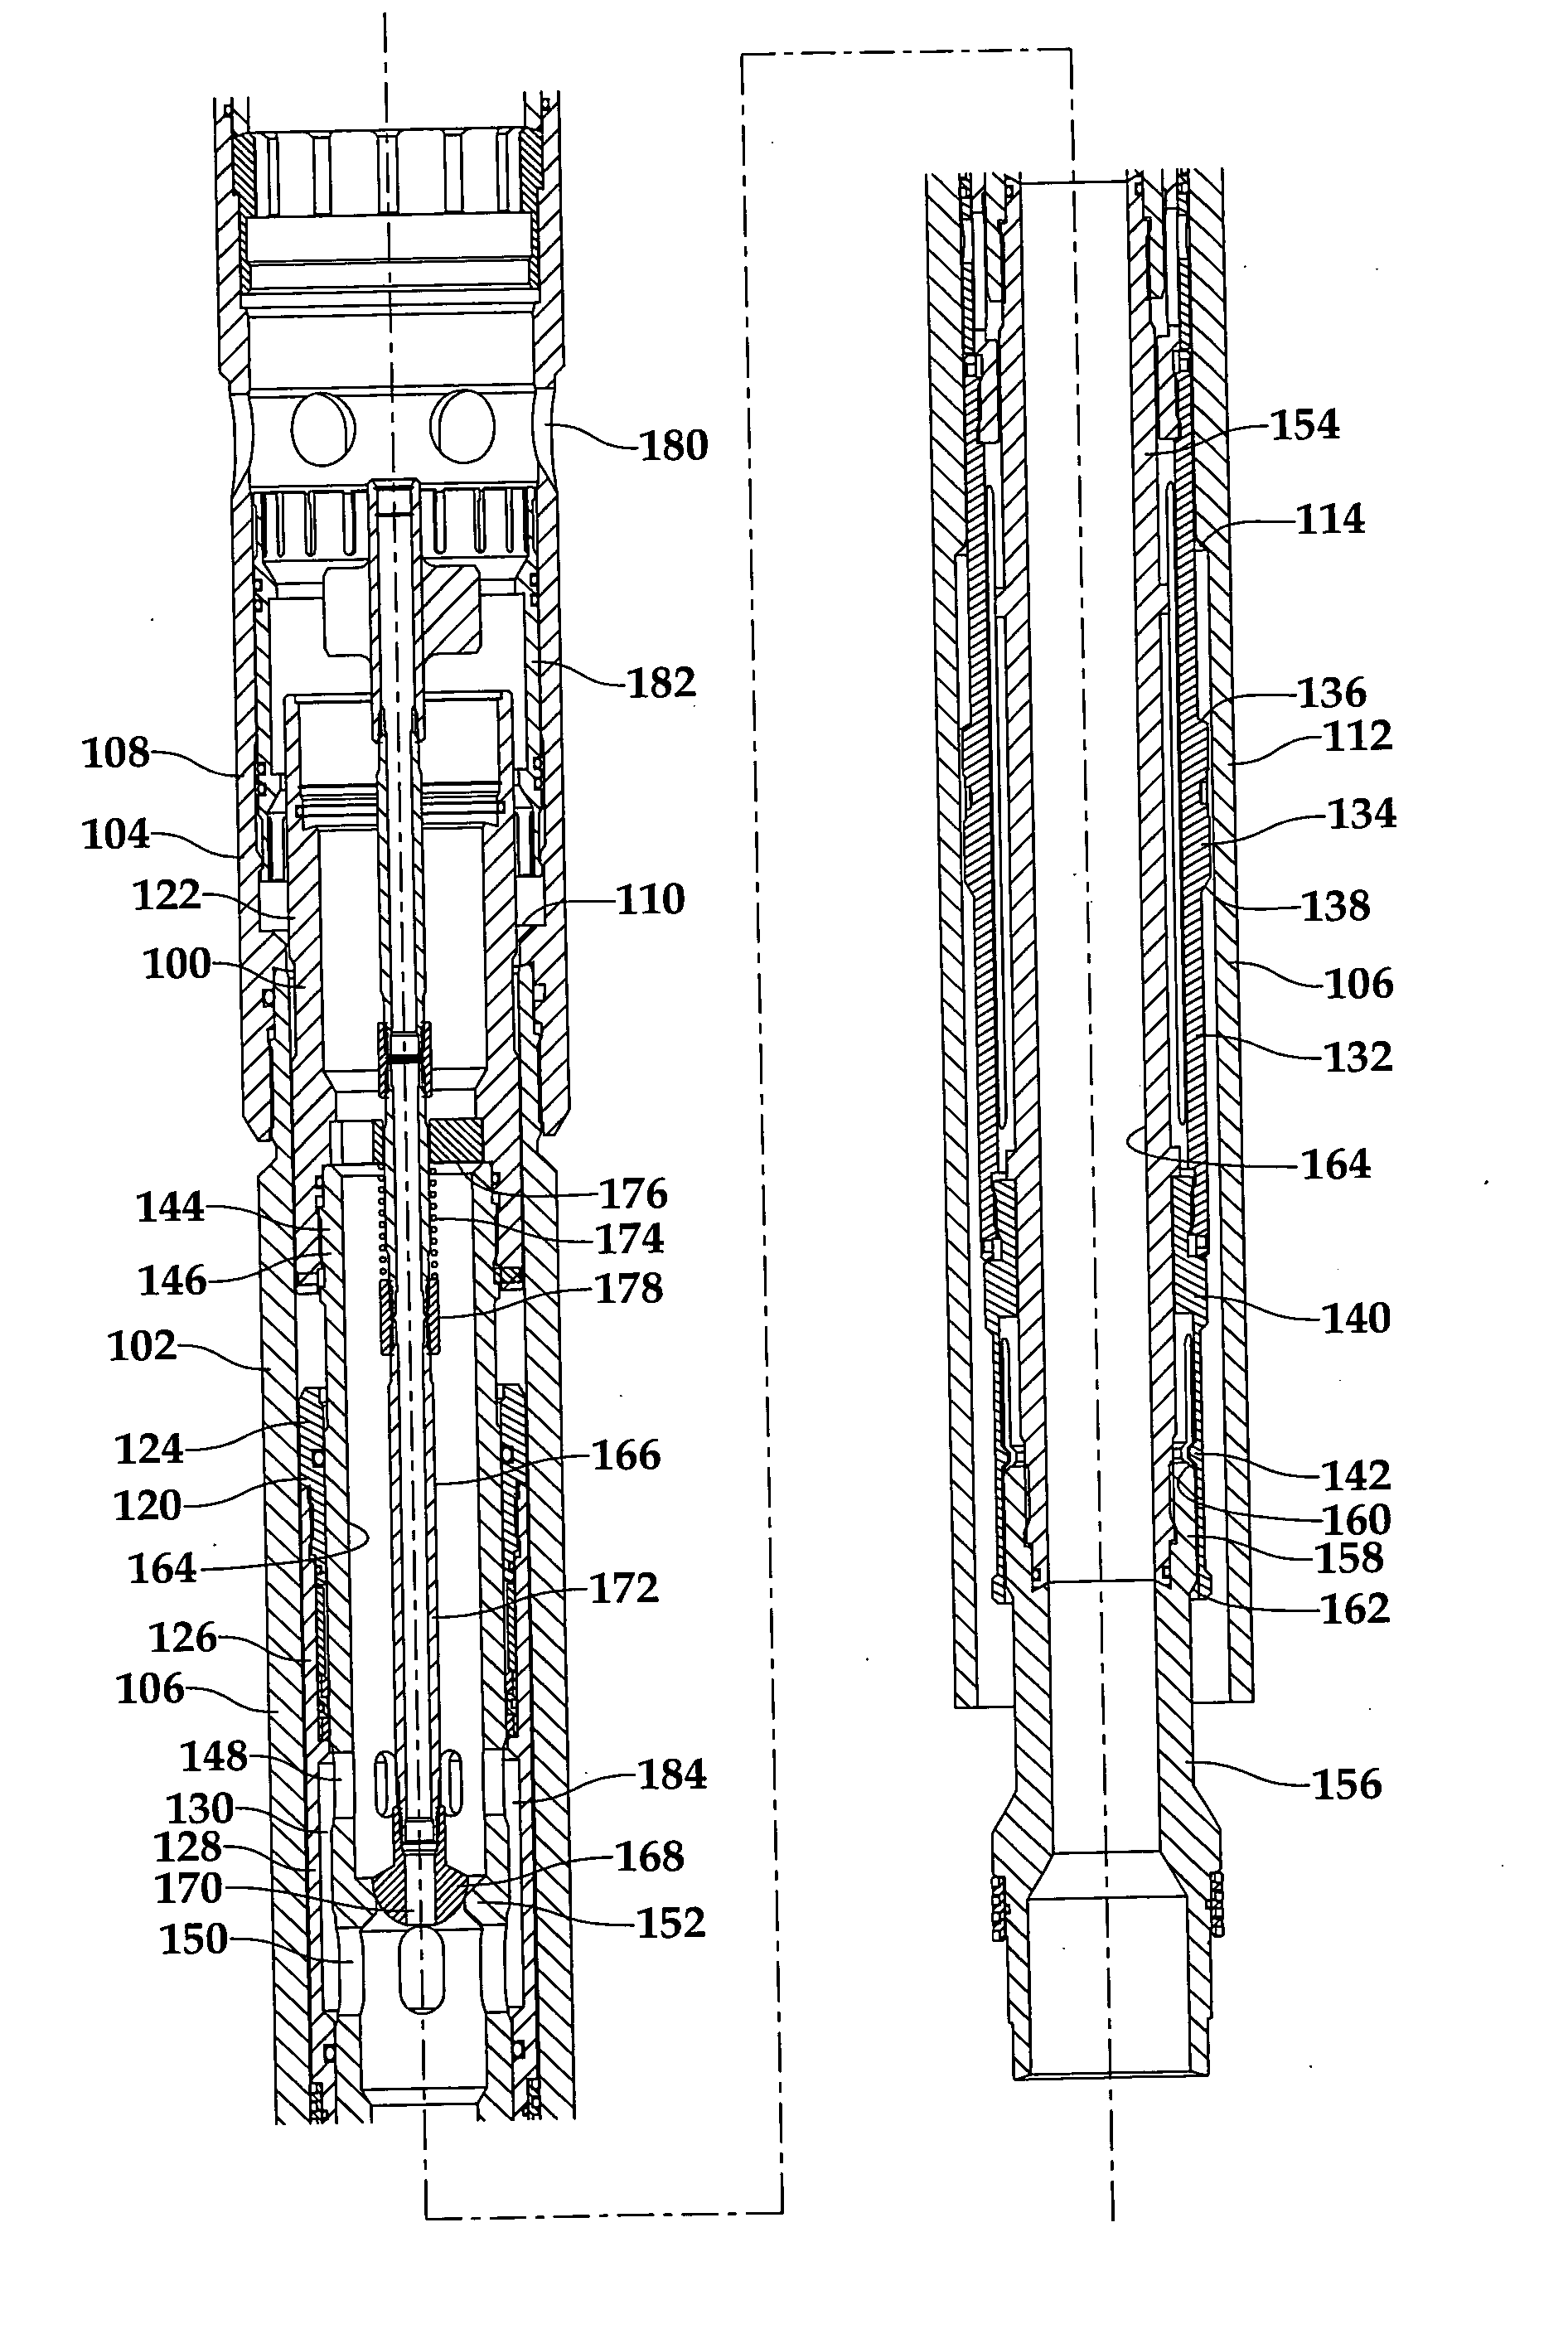 Reverse out valve for well treatment operations